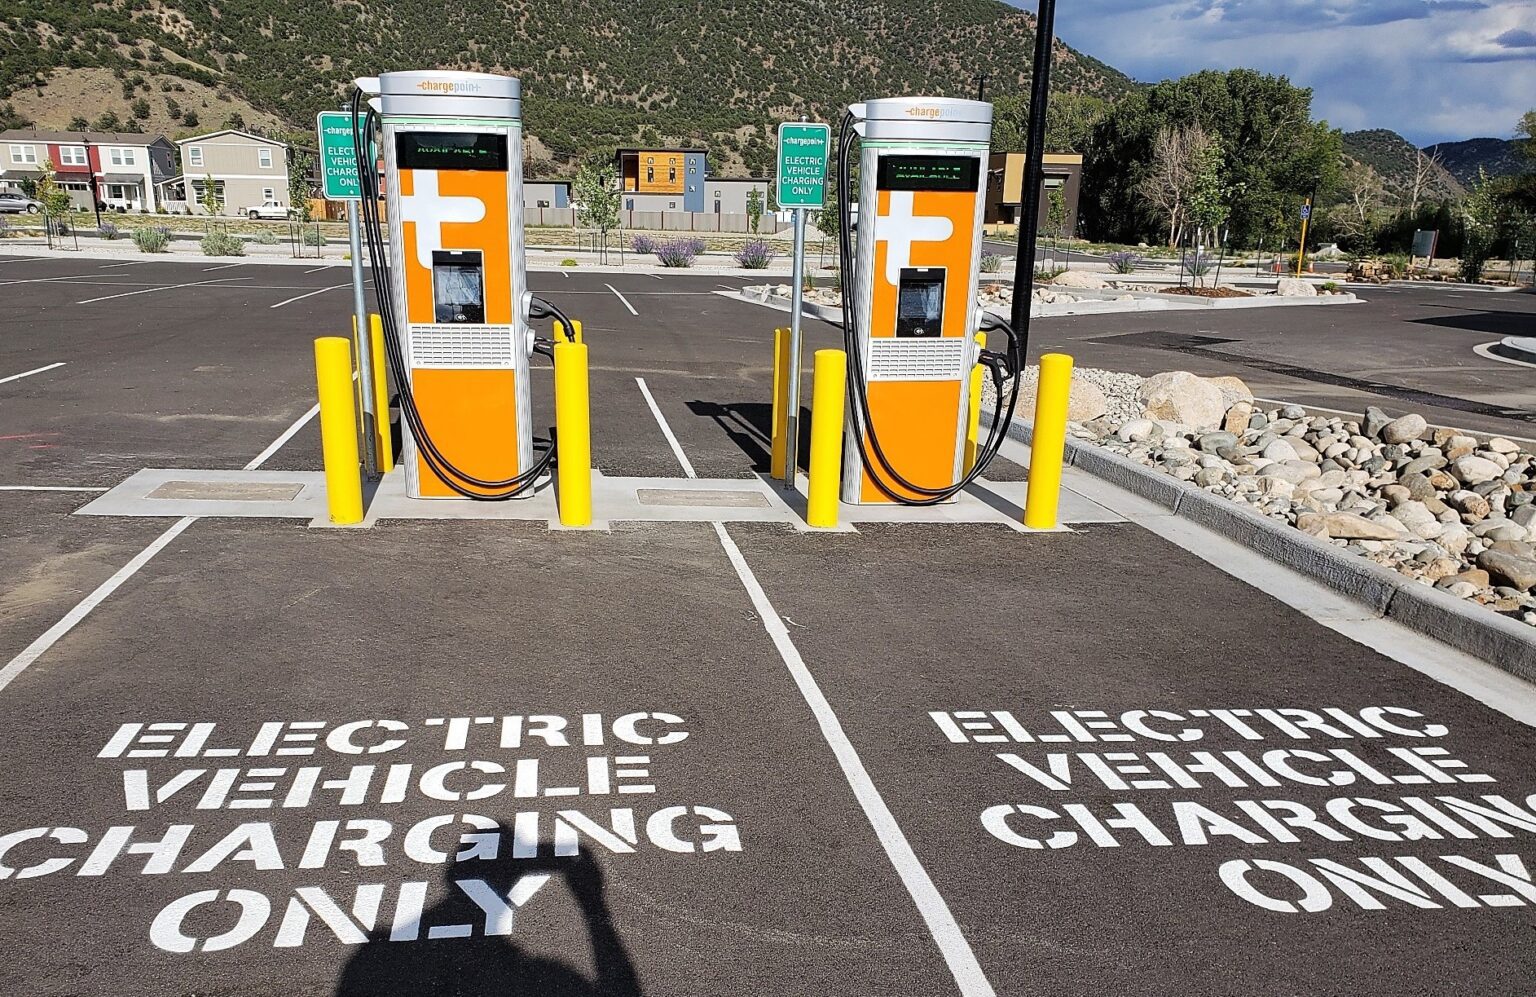 Electric Vehicle Charging Stations National Design, Architecture and